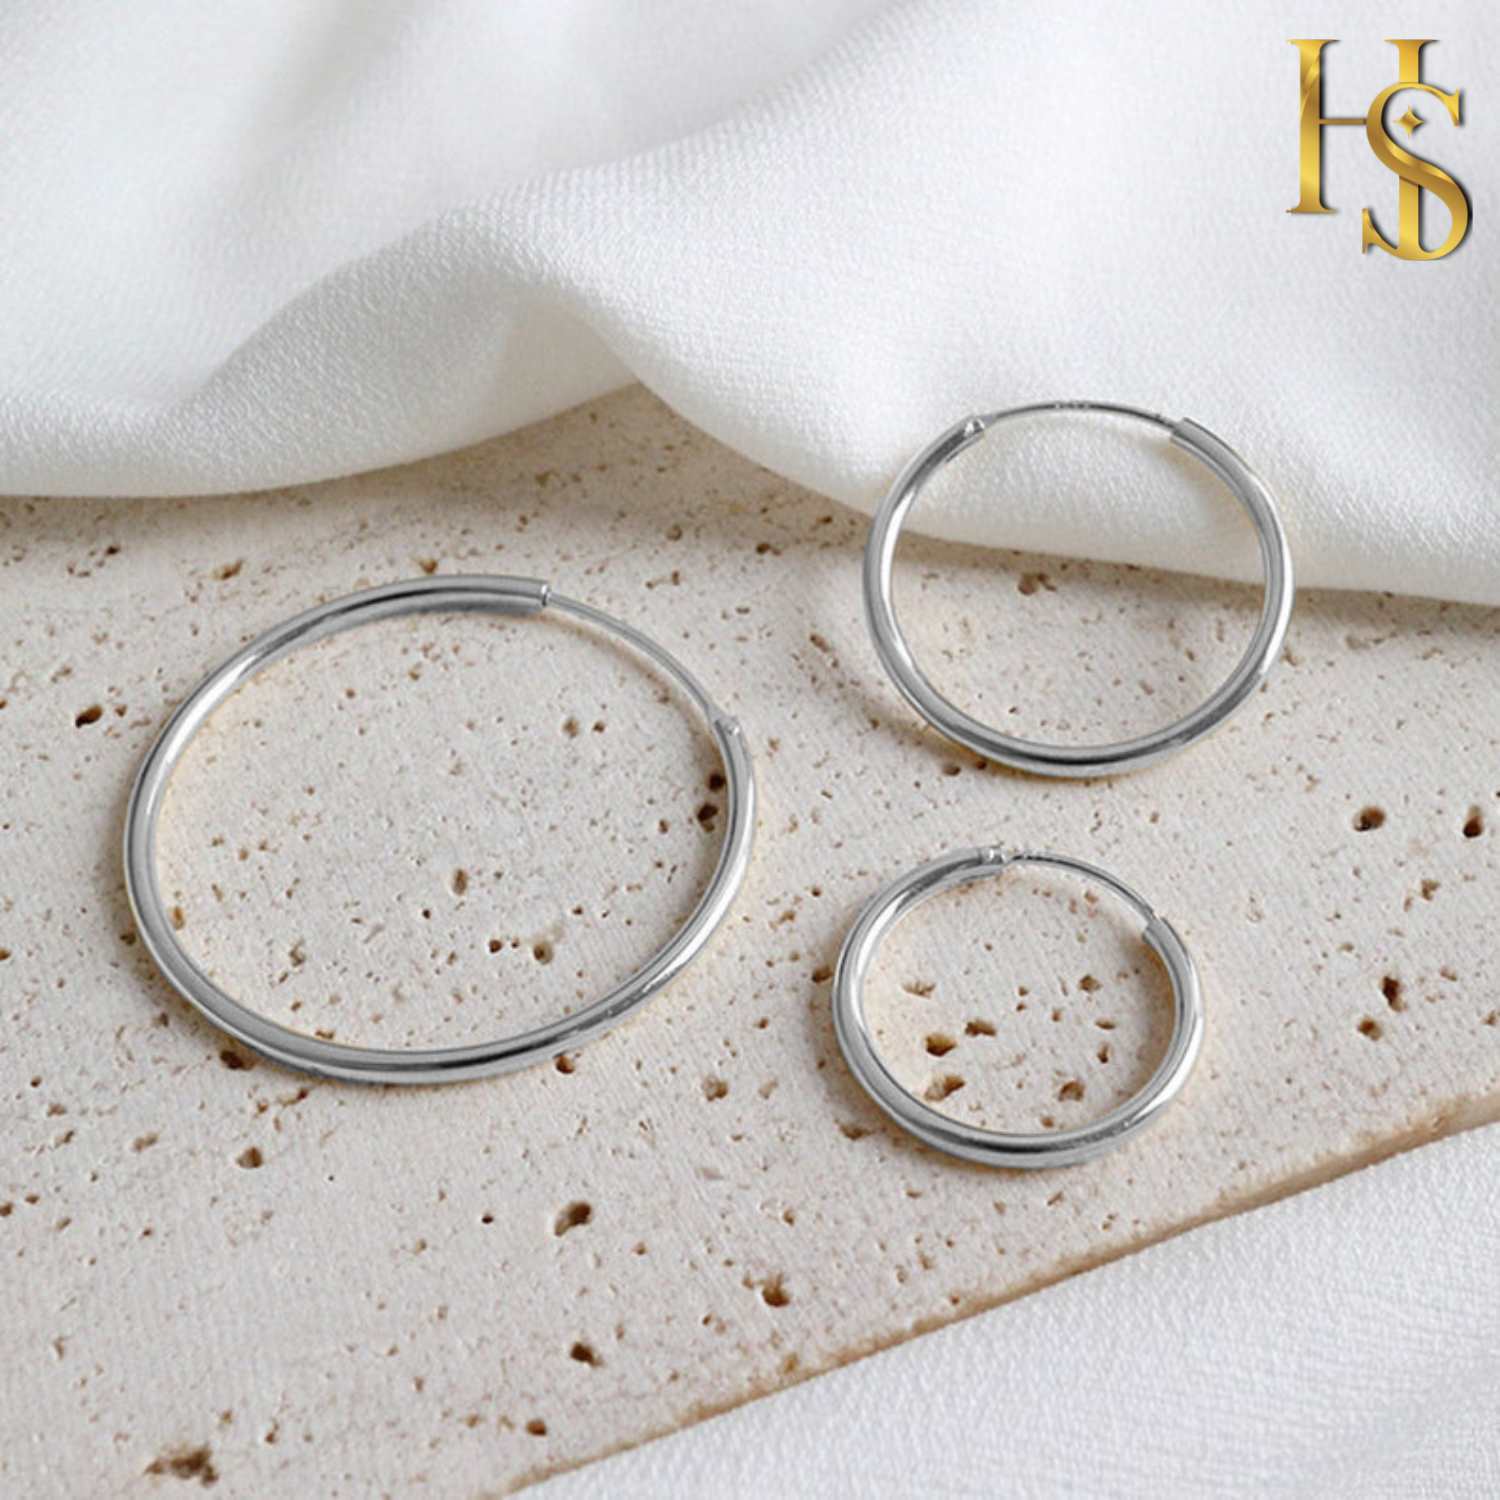 Classic Hoop Earrings in 92.5 Sterling Silver - 1.2mm Thickness - Small Sizes 10mm to 20mm